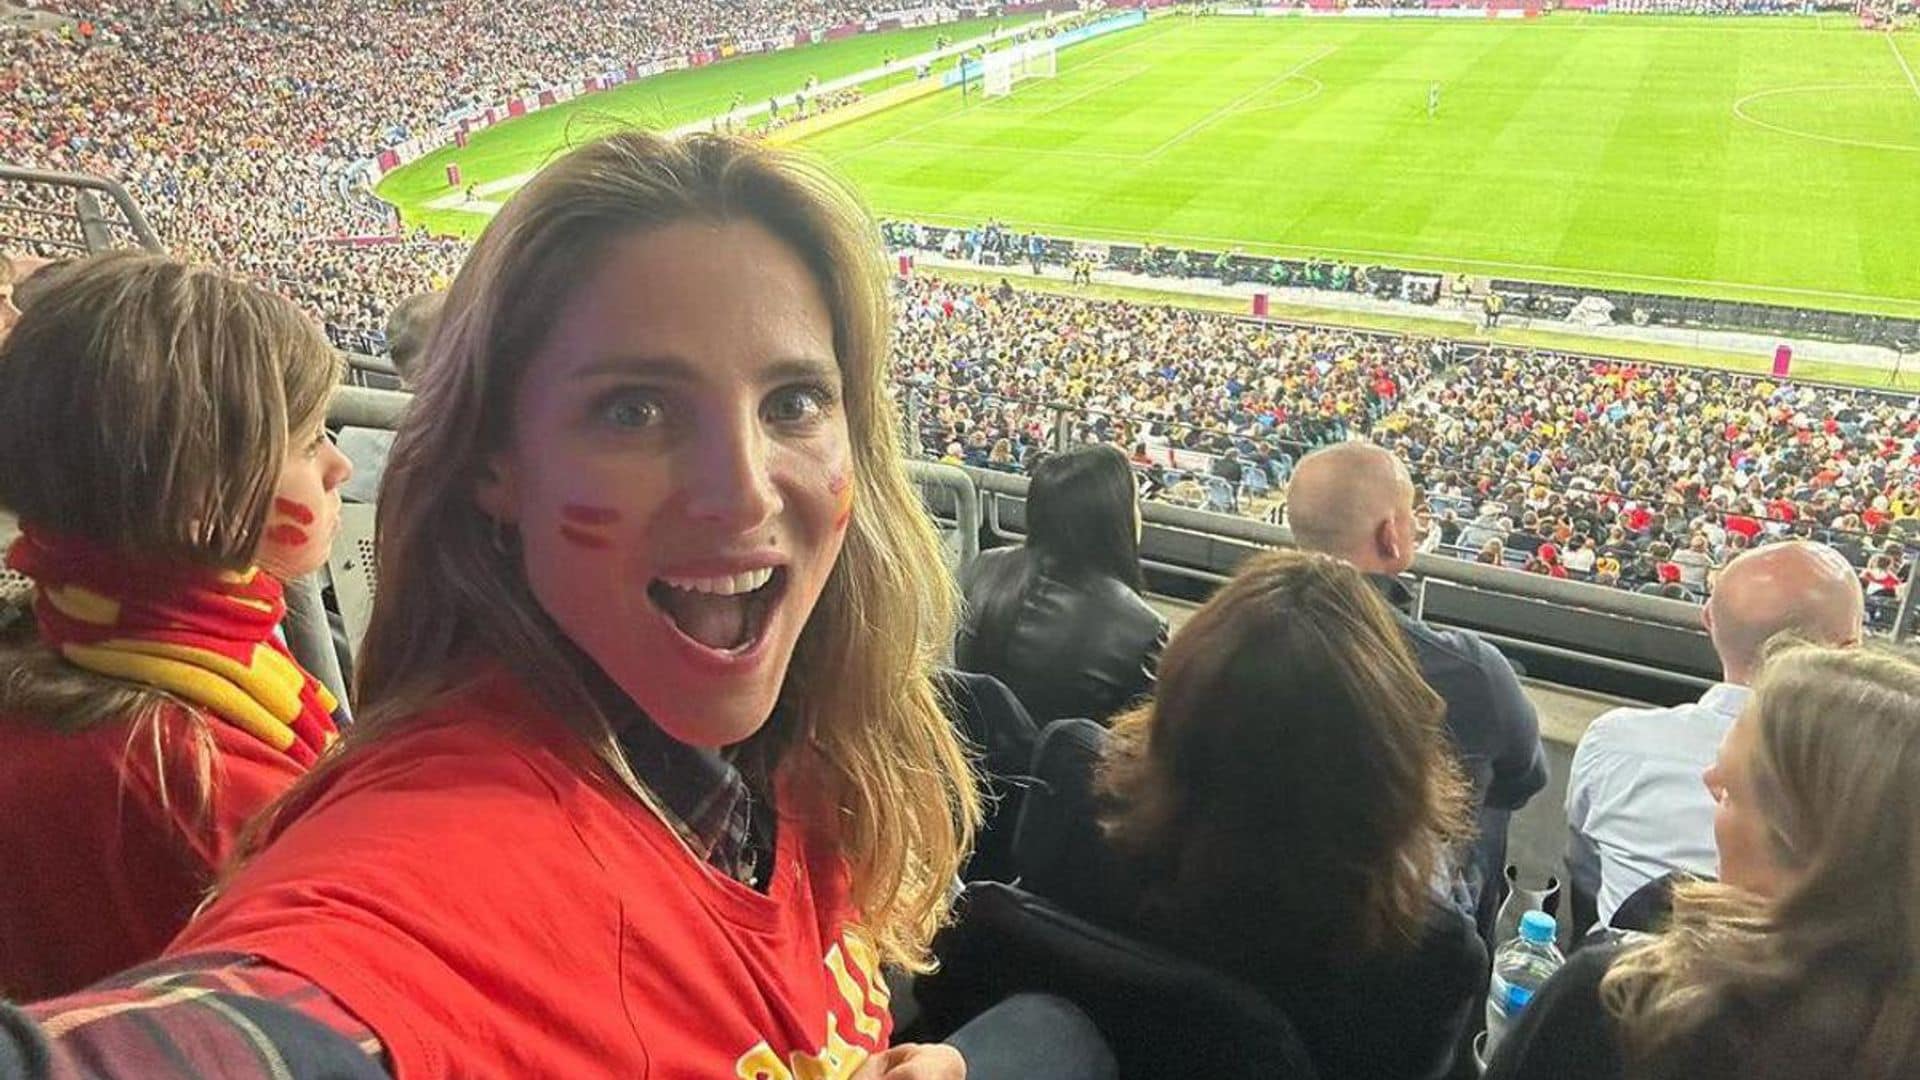 See Elsa Pataky and Chris Hemsworth show their excitement cheering Spain's World Cup Victory